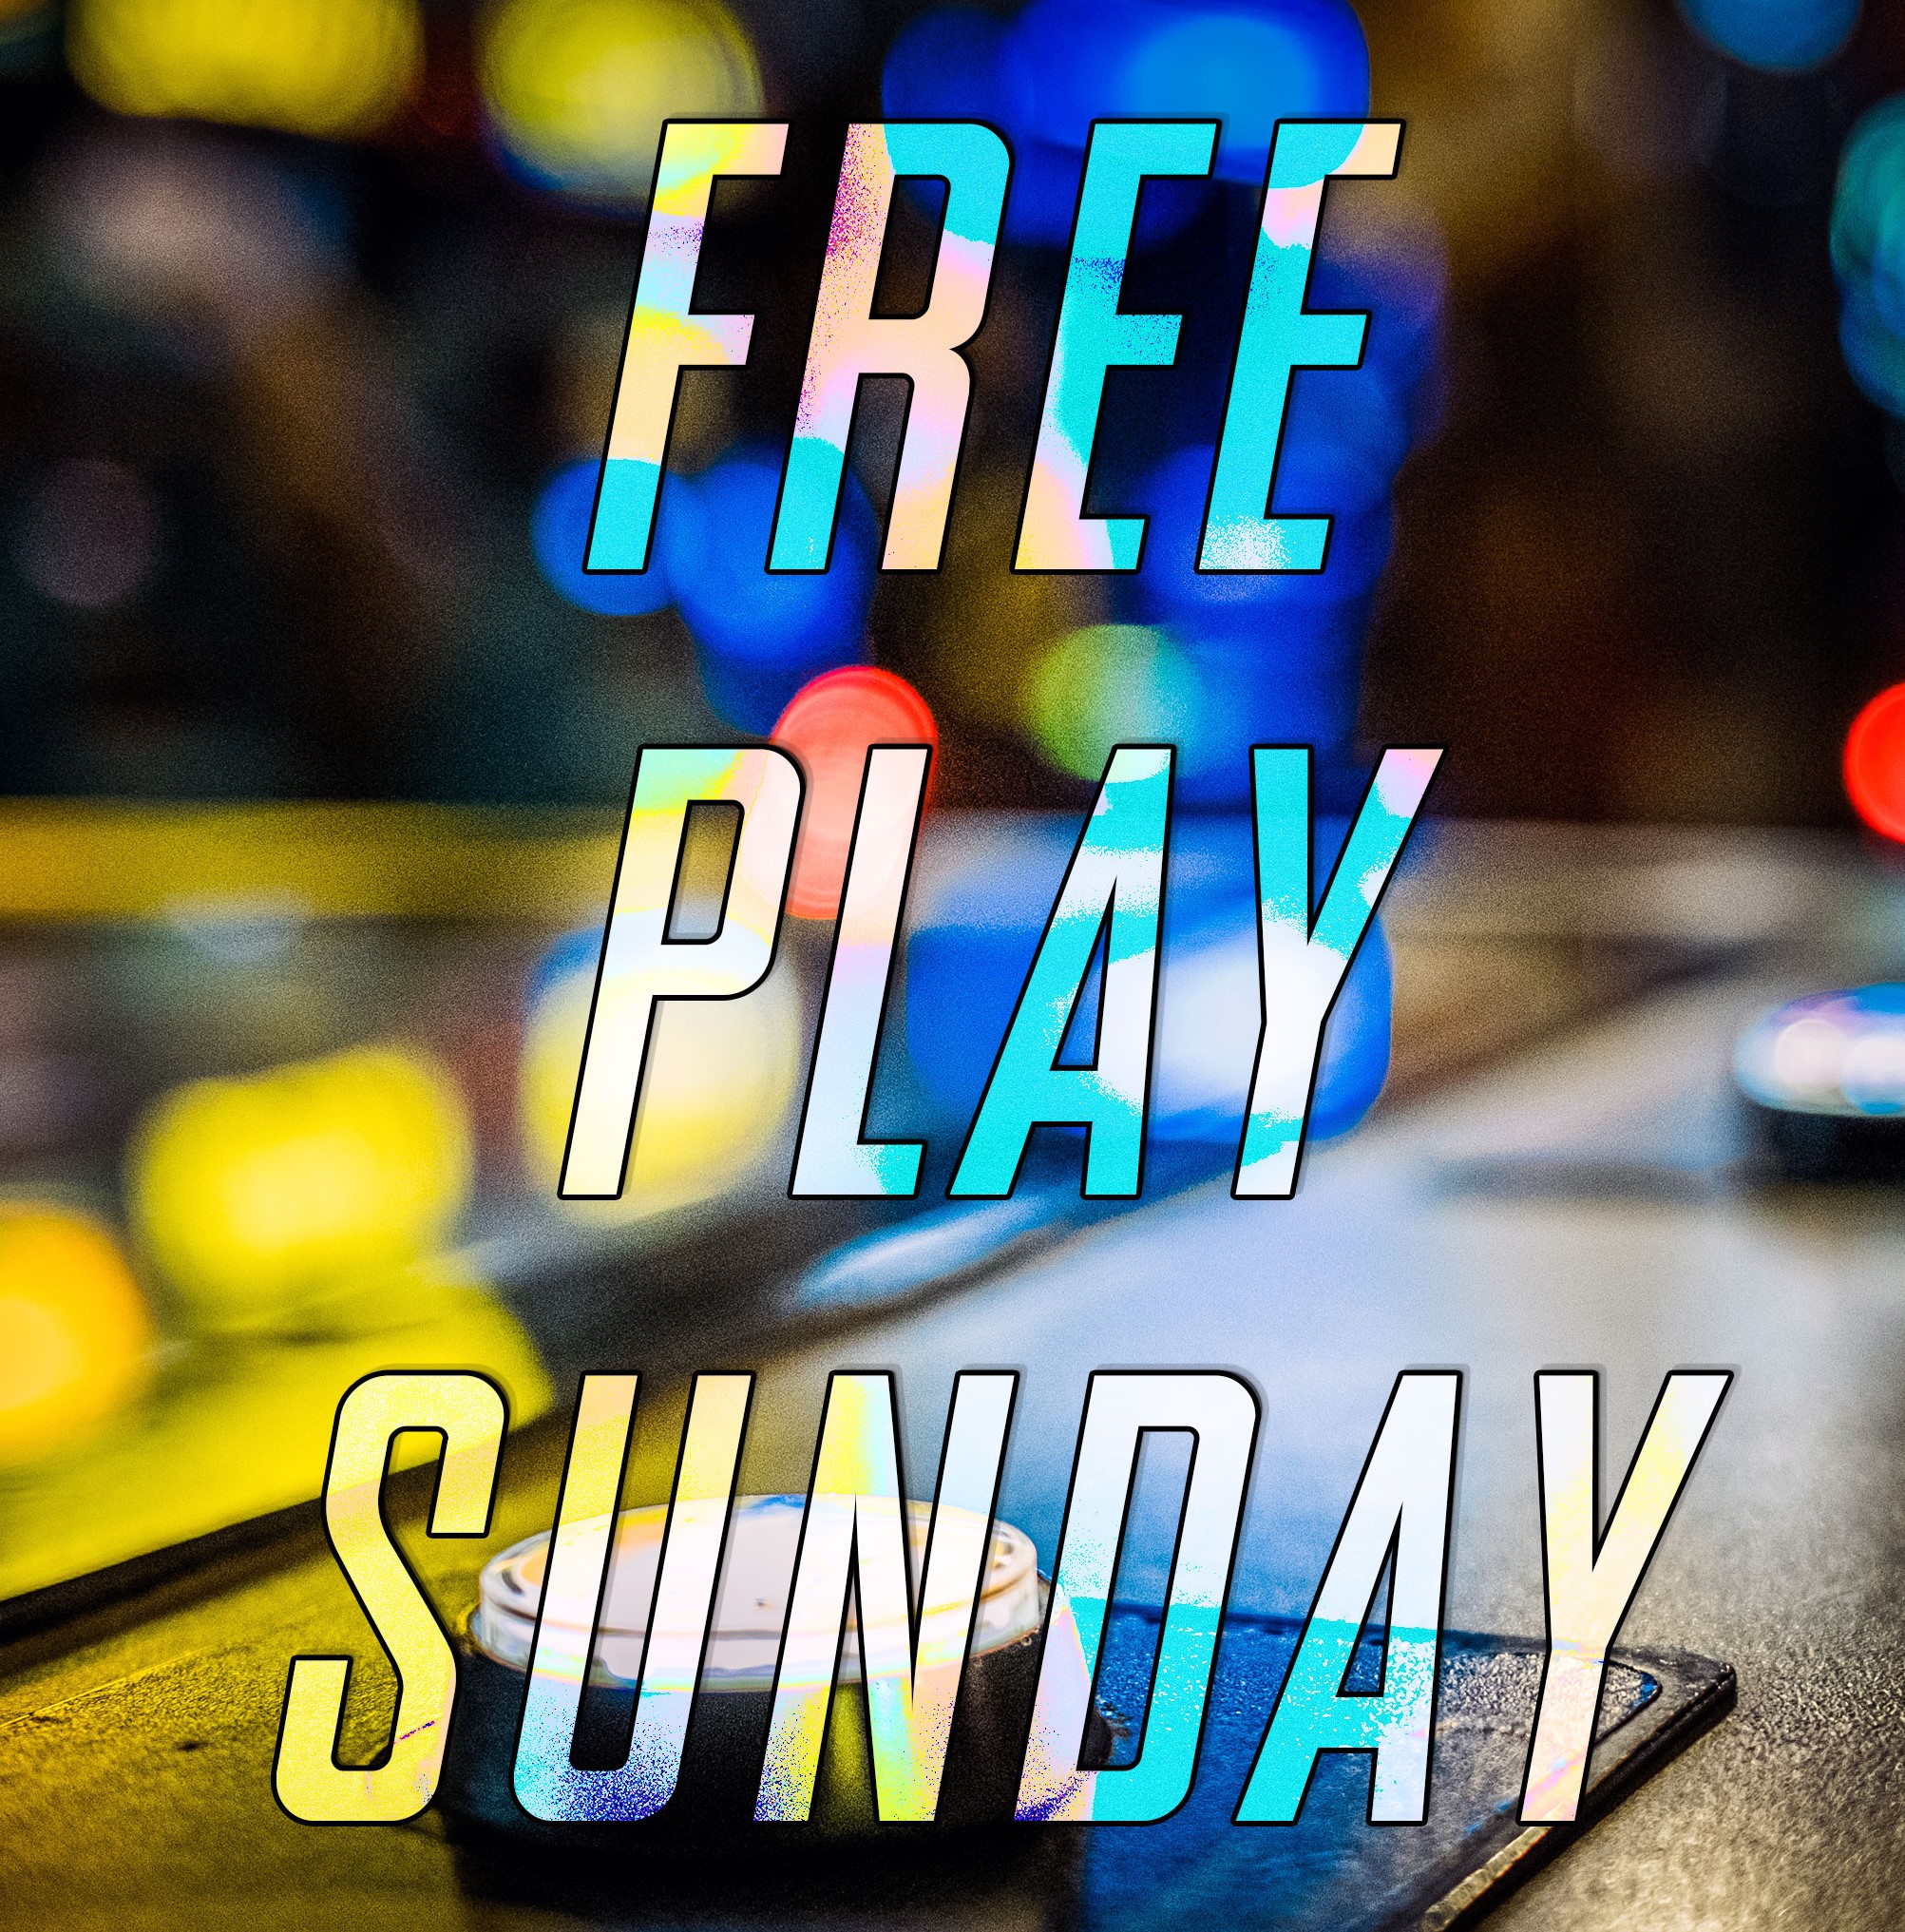 FREE PLAY SUNDAY 23th JULY @ CLUB PLAY 2PM-2AM ***FREE ENTRY OFFER! *** MORE DETAILS IN THE THREAD!